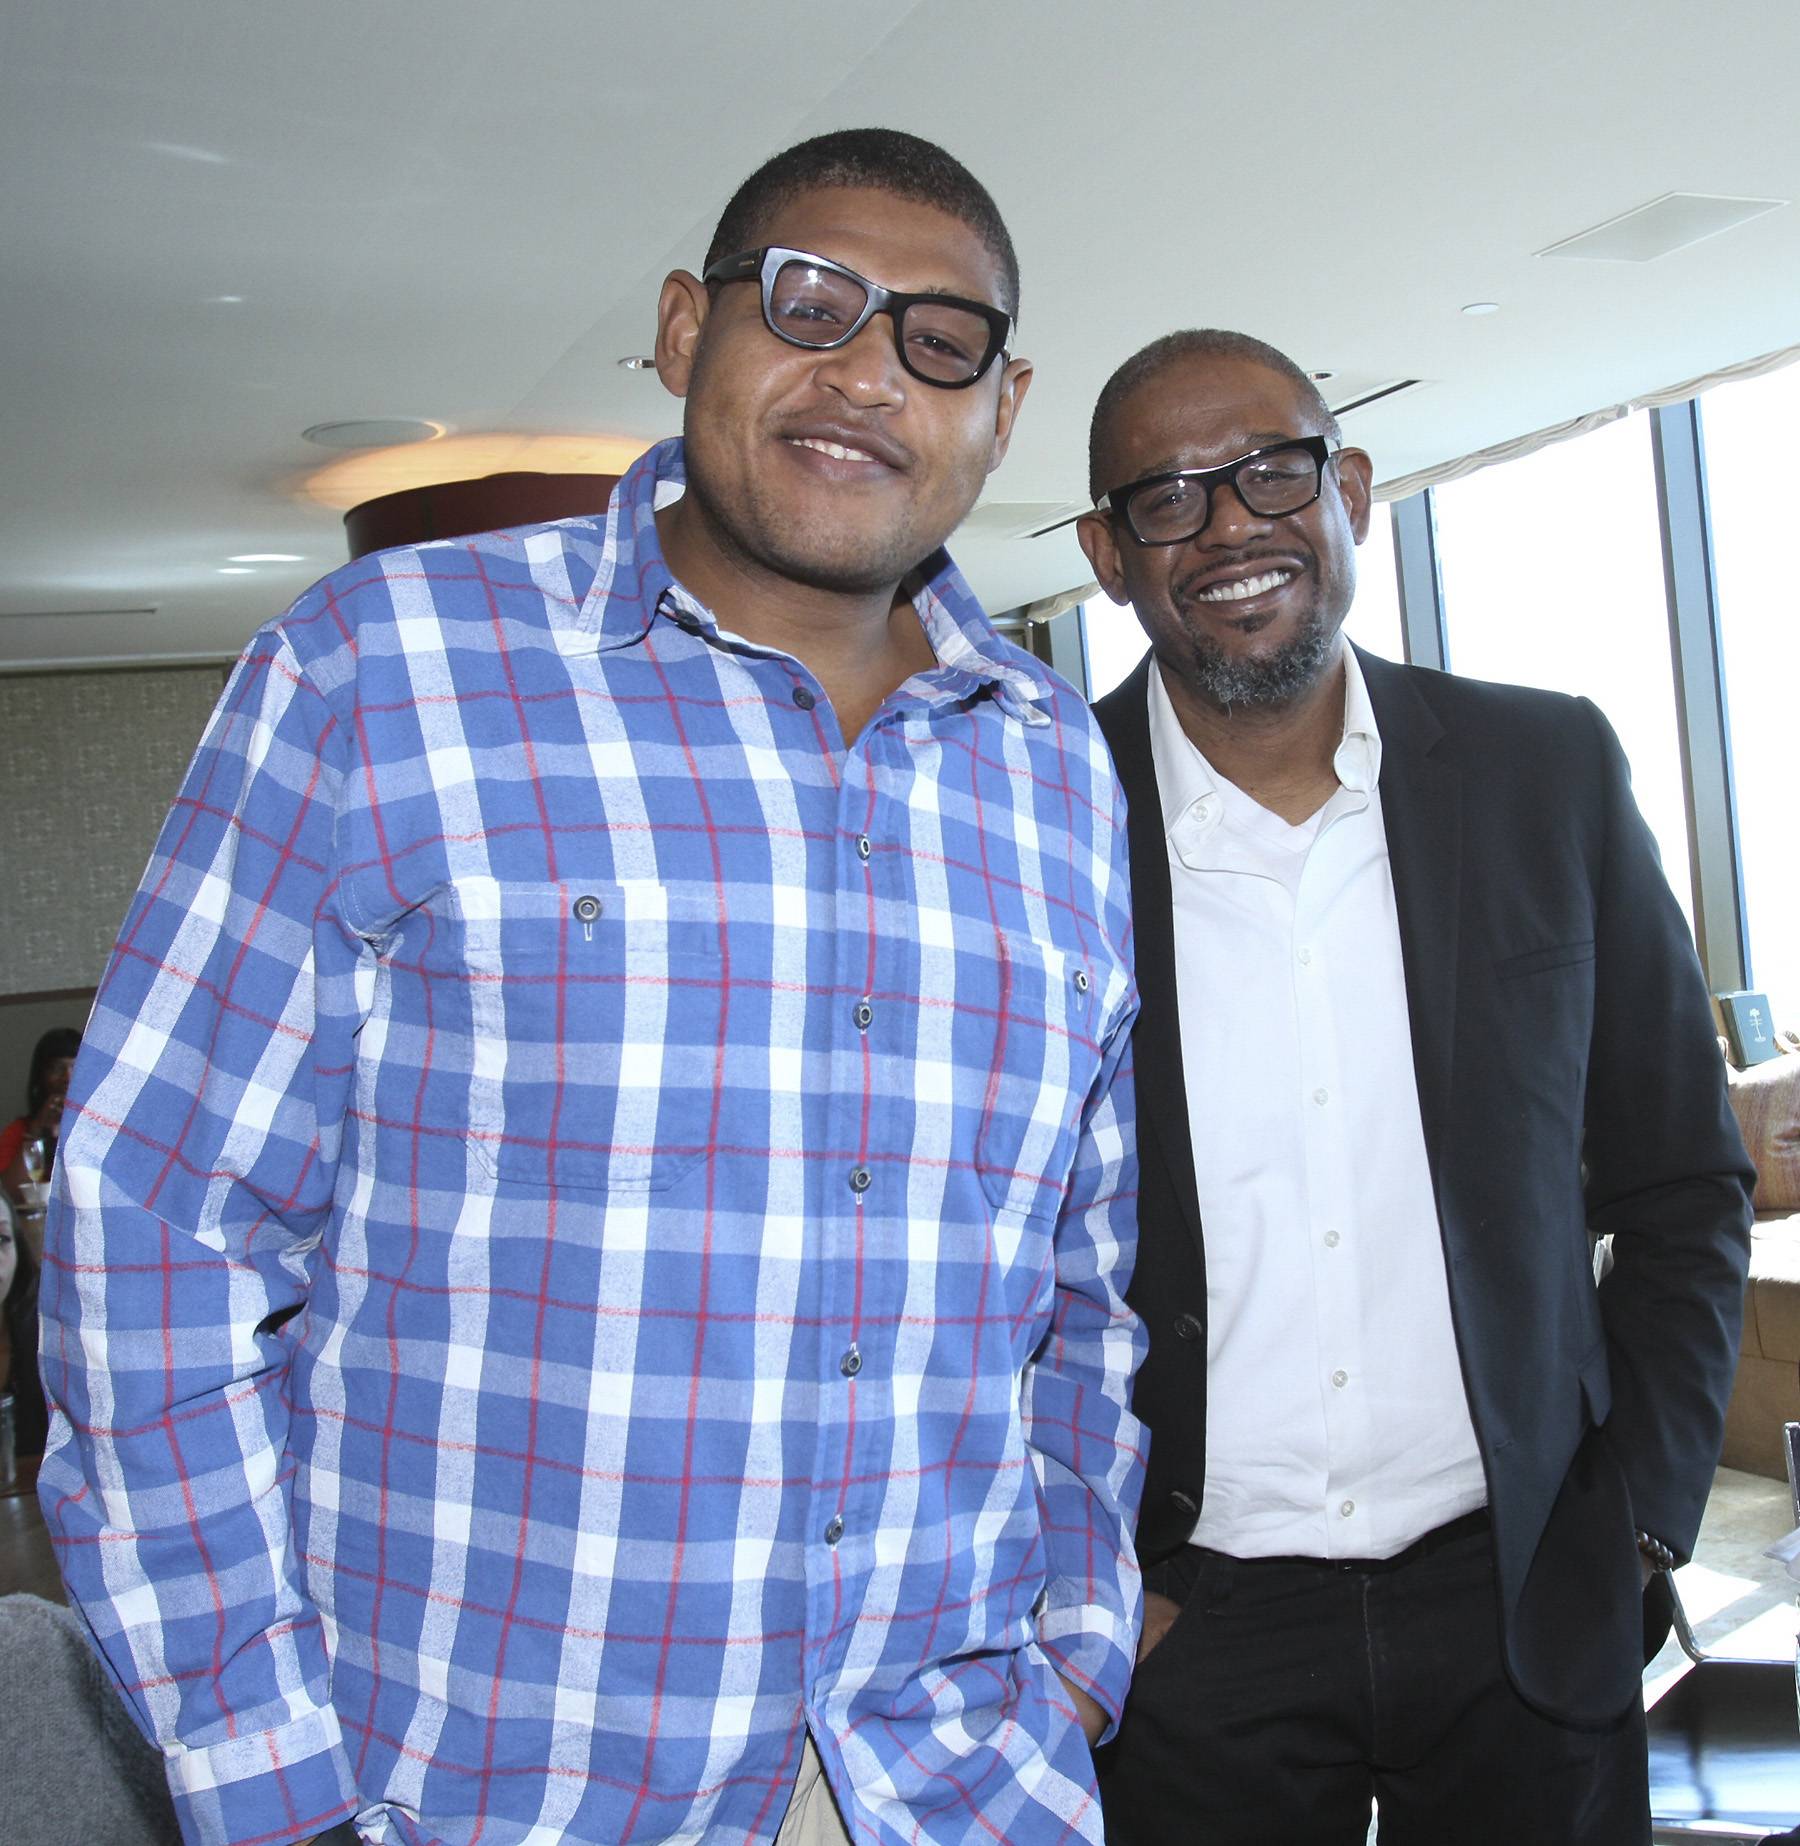 Omar Miller and Forest Whitaker are pictured together at an event.